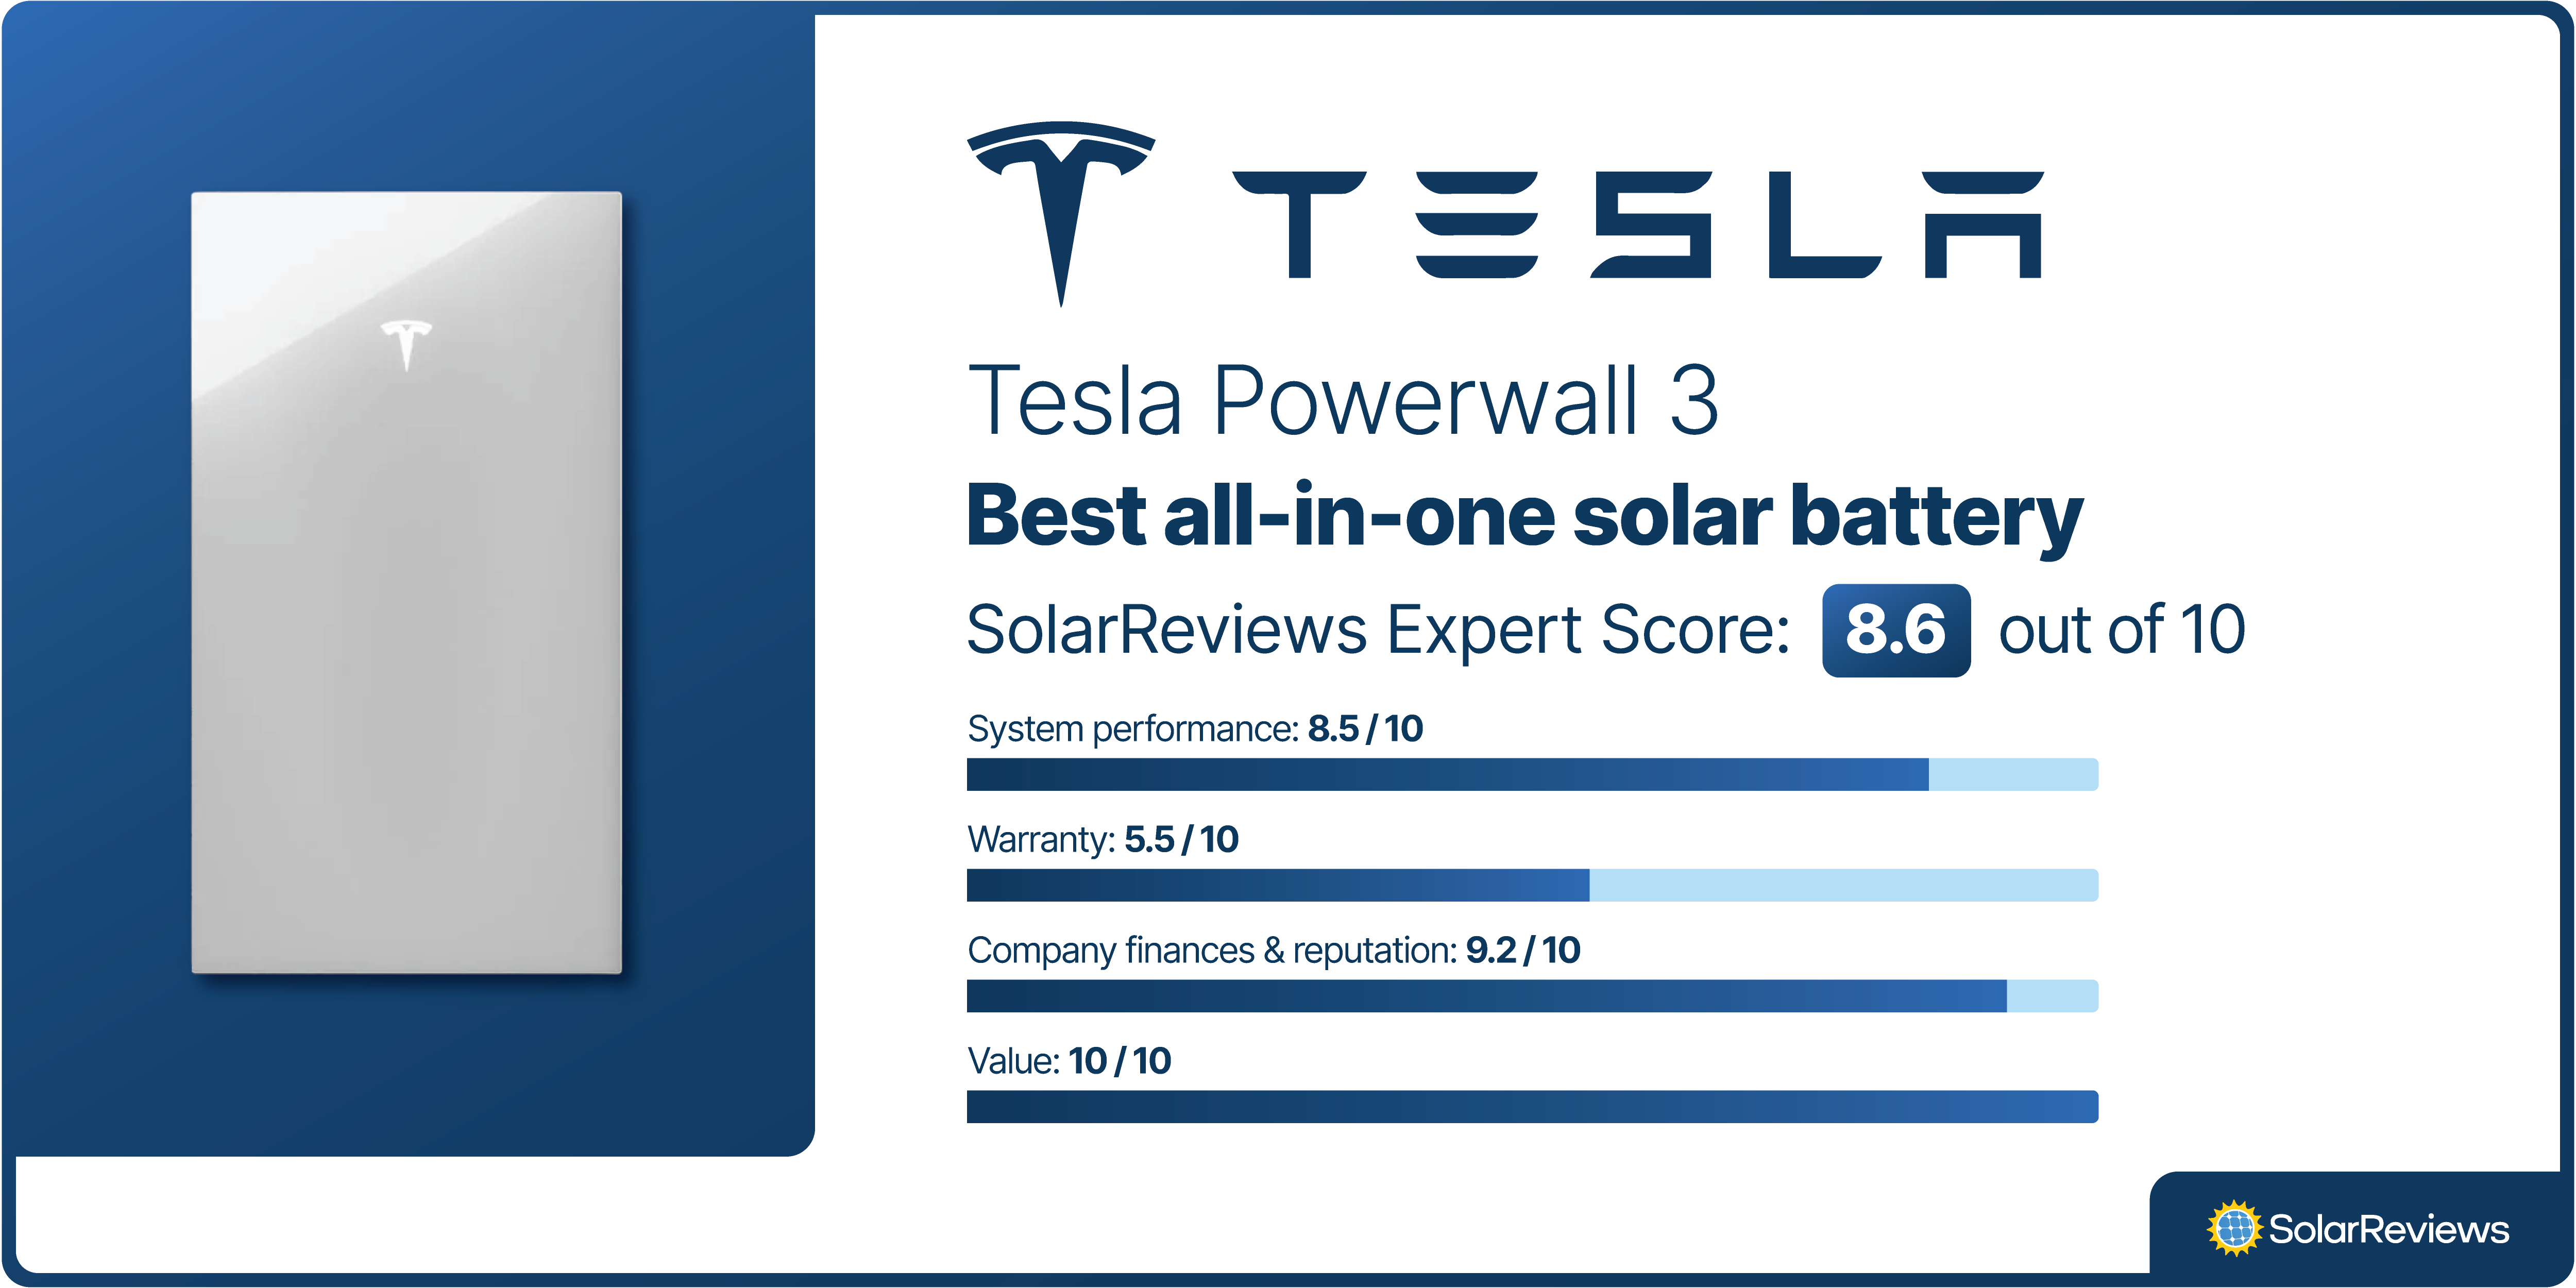 The Tesla Powerwall was voted best all-in-one solar battery, with a SolarReviews Expert Score of 8.6/10, scoring highest in value, company finances and reputation, and system performance.